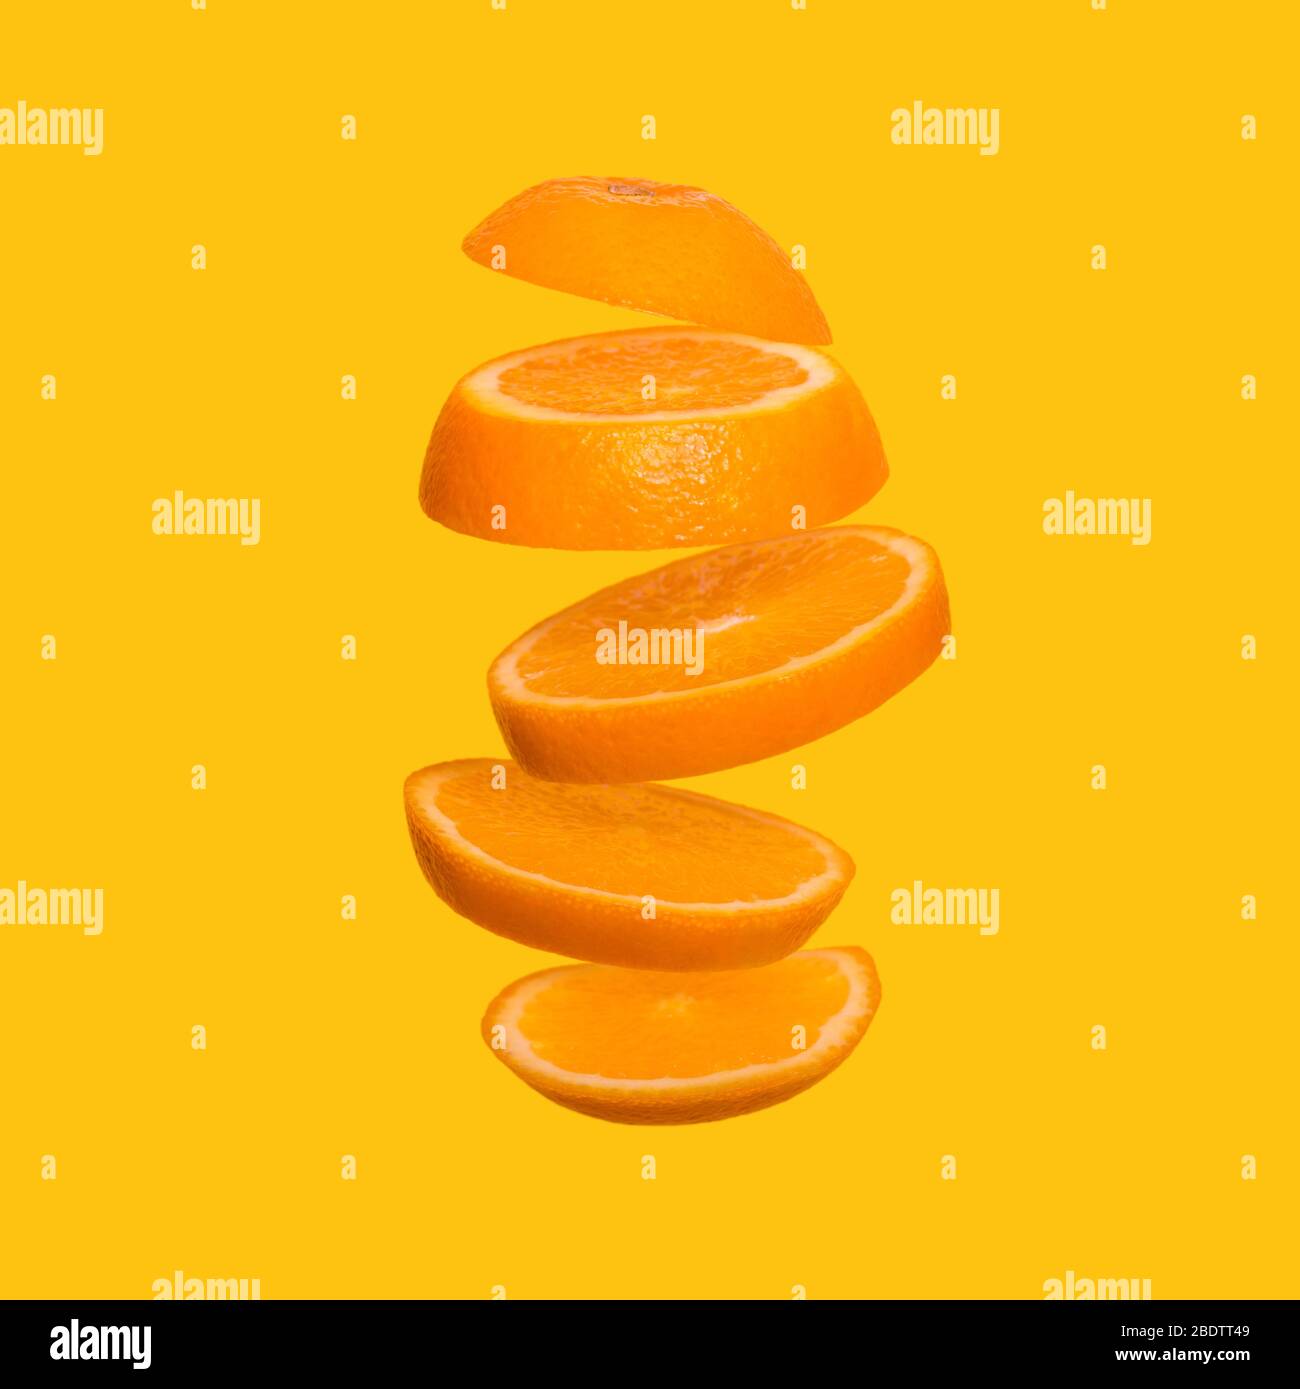 Creative concept with flying orange. Sliced orange on yellow background. Levity fruit floating in the air Stock Photo